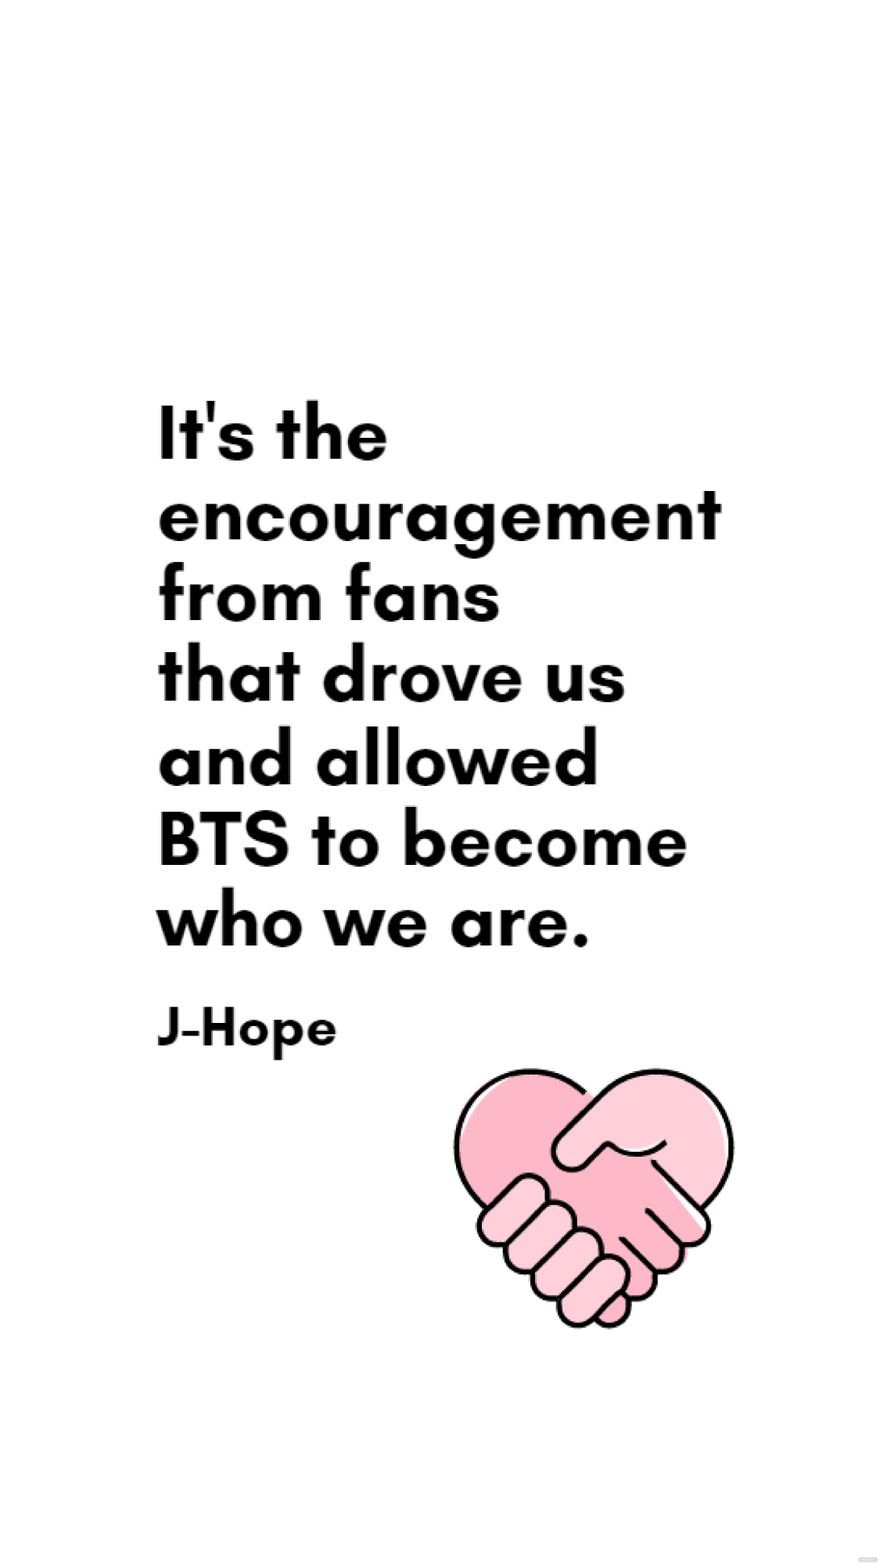 J-Hope - It's the encouragement from fans that drove us and allowed BTS to become who we are.